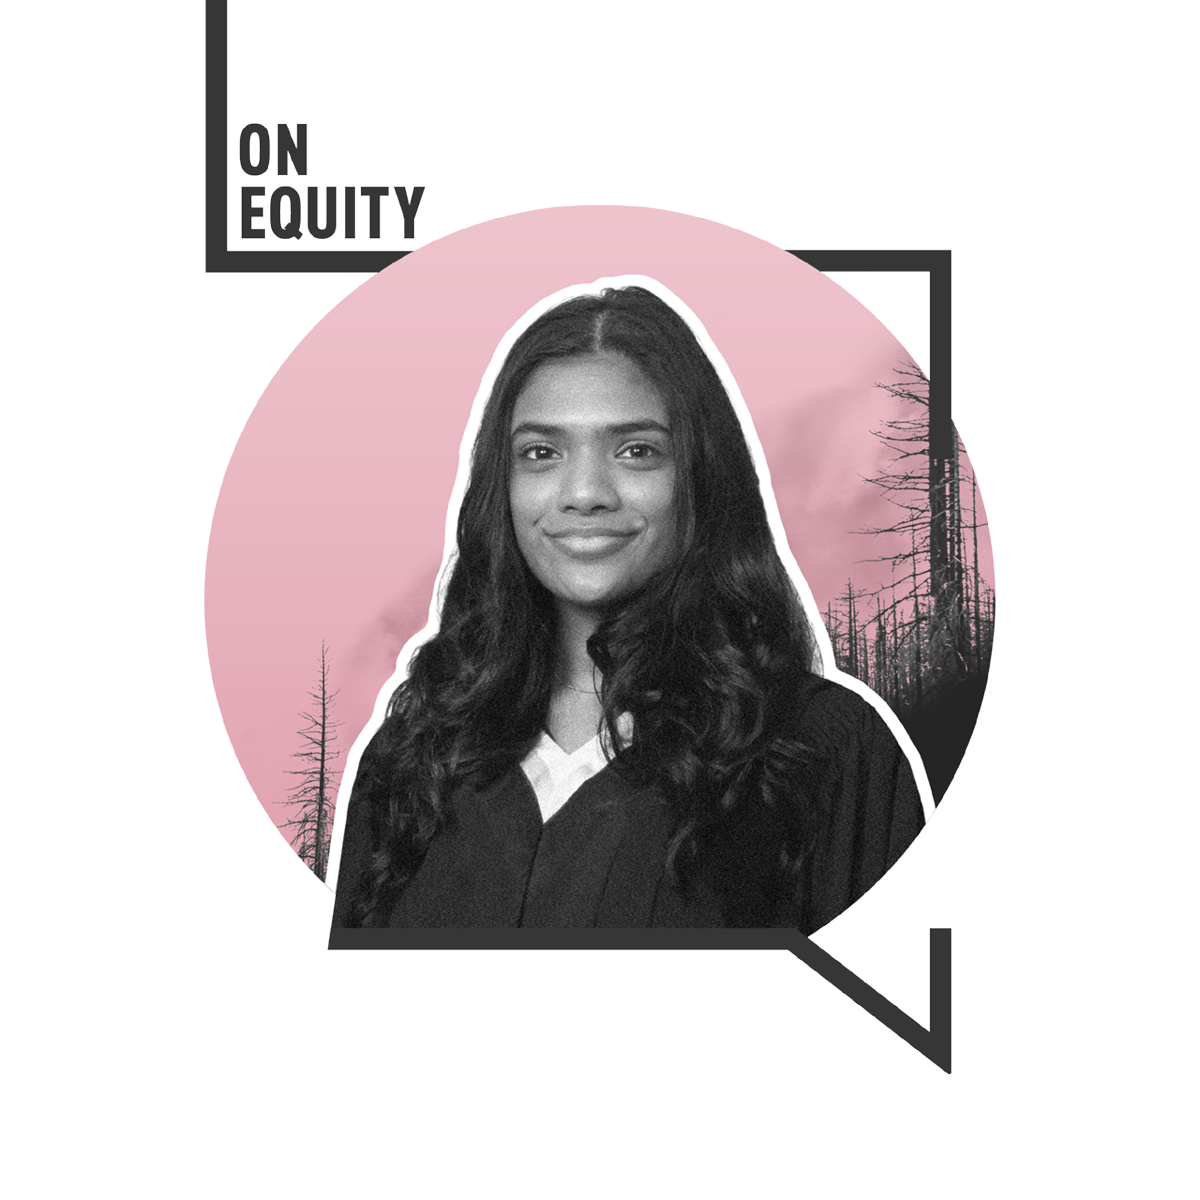 A black and white headshot of Naisha Khan on a pink circle inside the black outline of a speech bubble with the text "On Equity" in the top left corner.